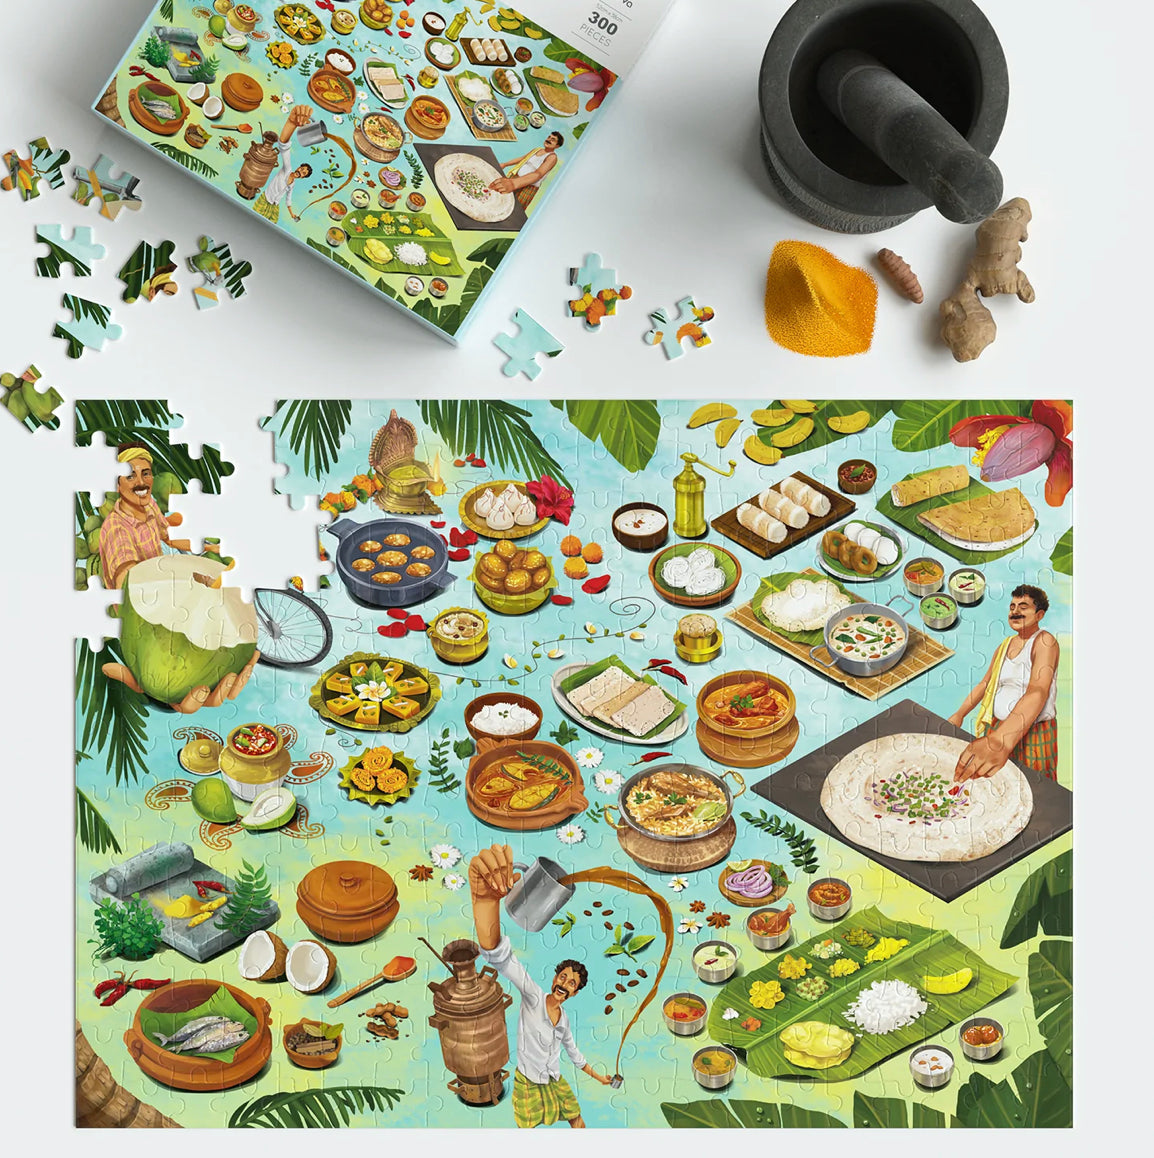 Melting Pot - South Indian Gastronomy - 300 piece Jigsaw Puzzle